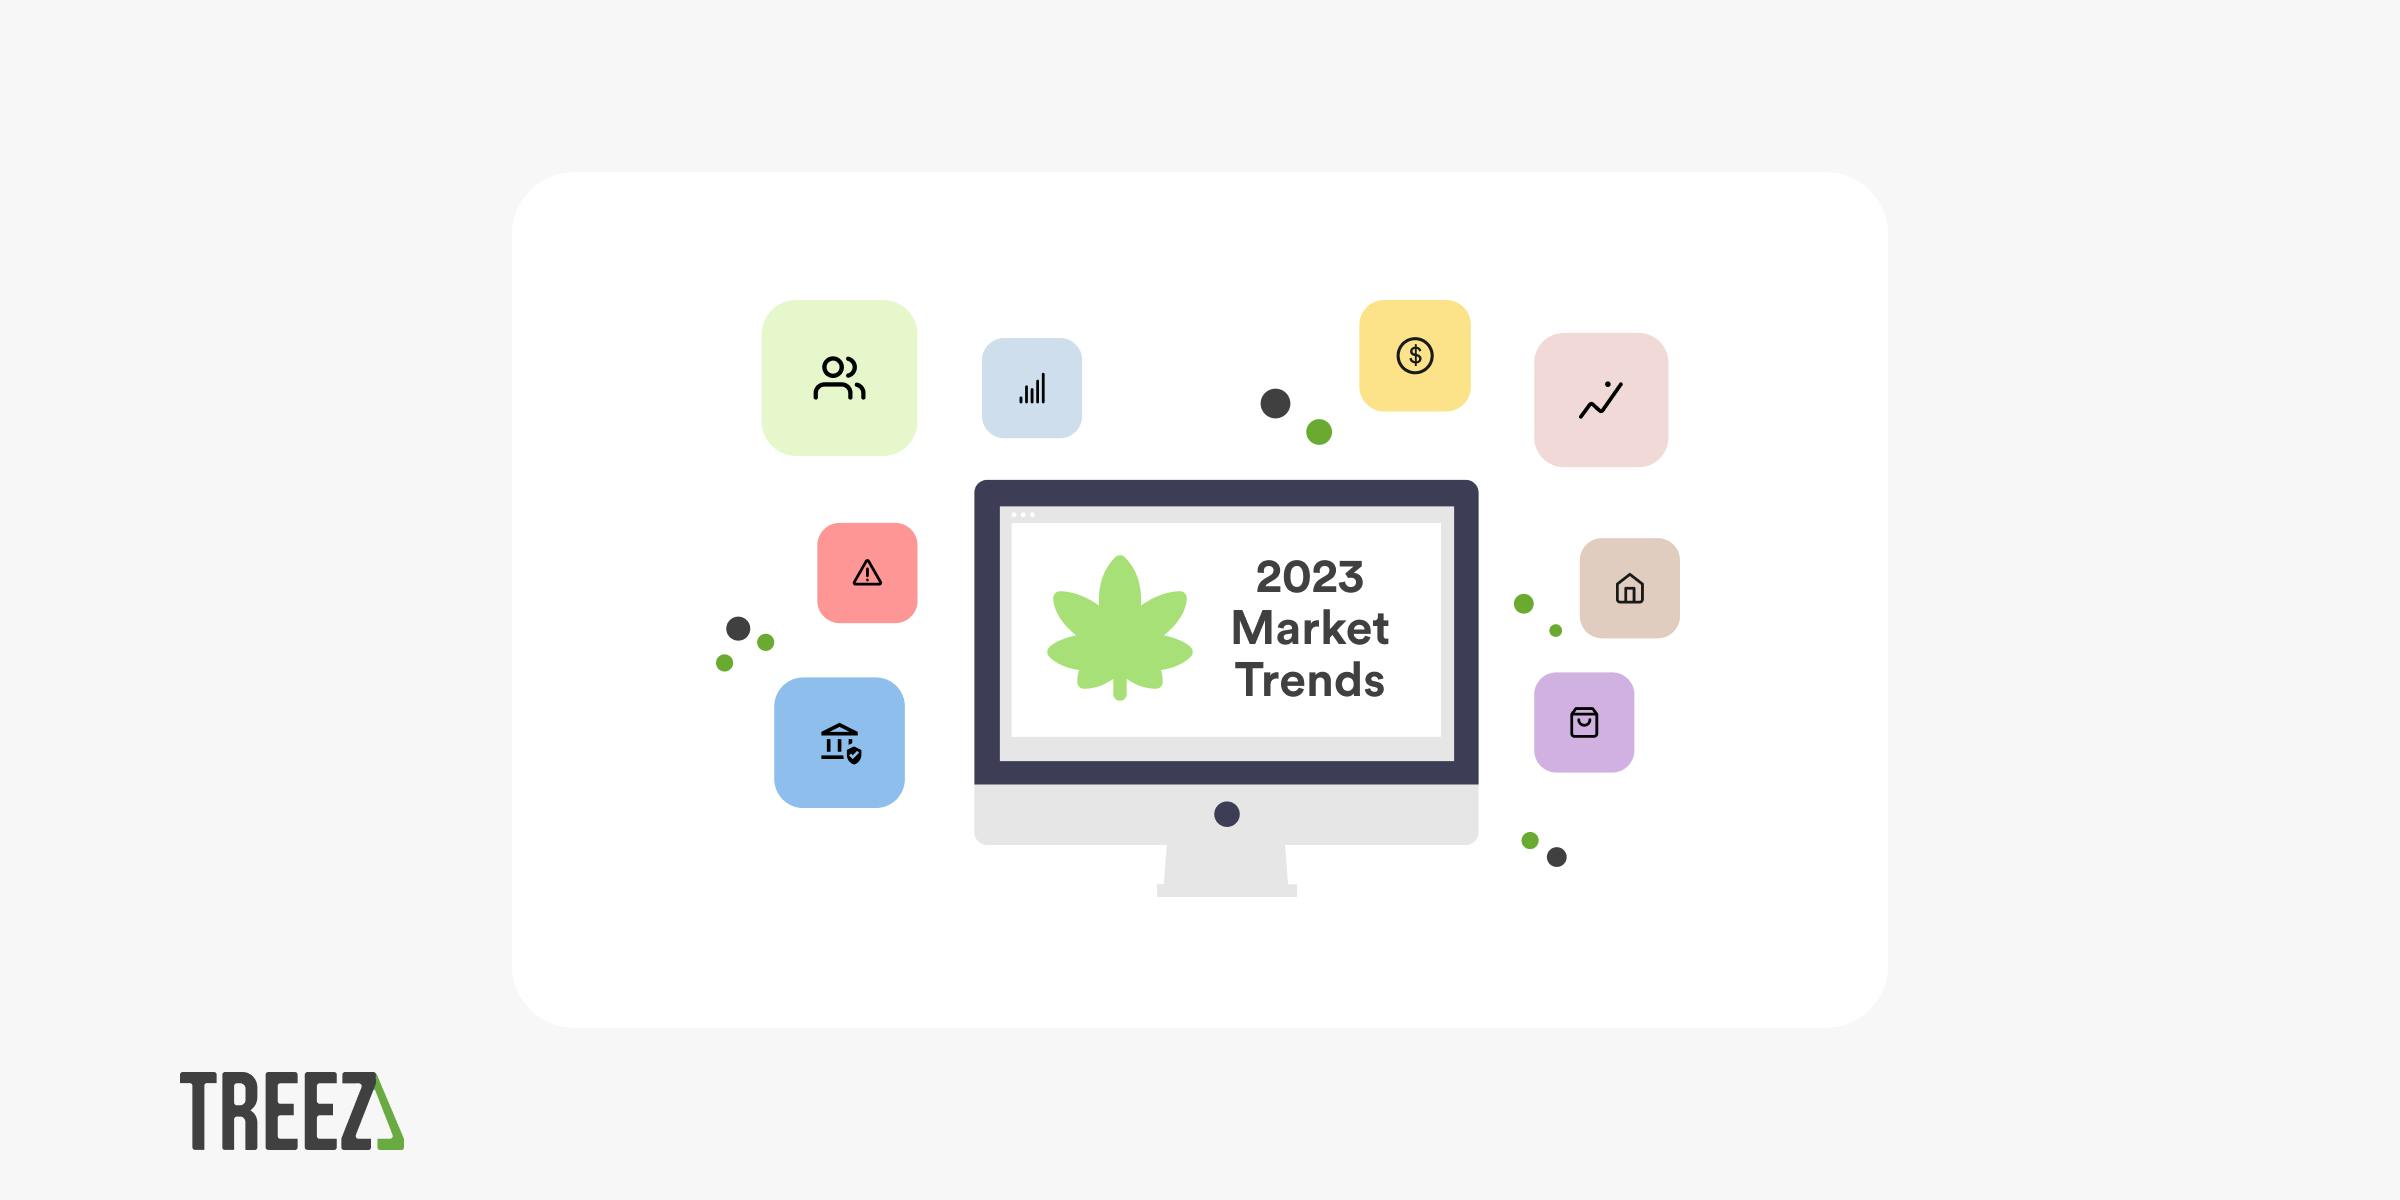 Promotional graphic for TREEZ featuring a central computer monitor with the text '2023 Market Trends' and a cannabis leaf symbol on the screen. Surrounding the monitor are colorful, abstract icons representing different business and analytics concepts. Below is the TREEZ company logo.